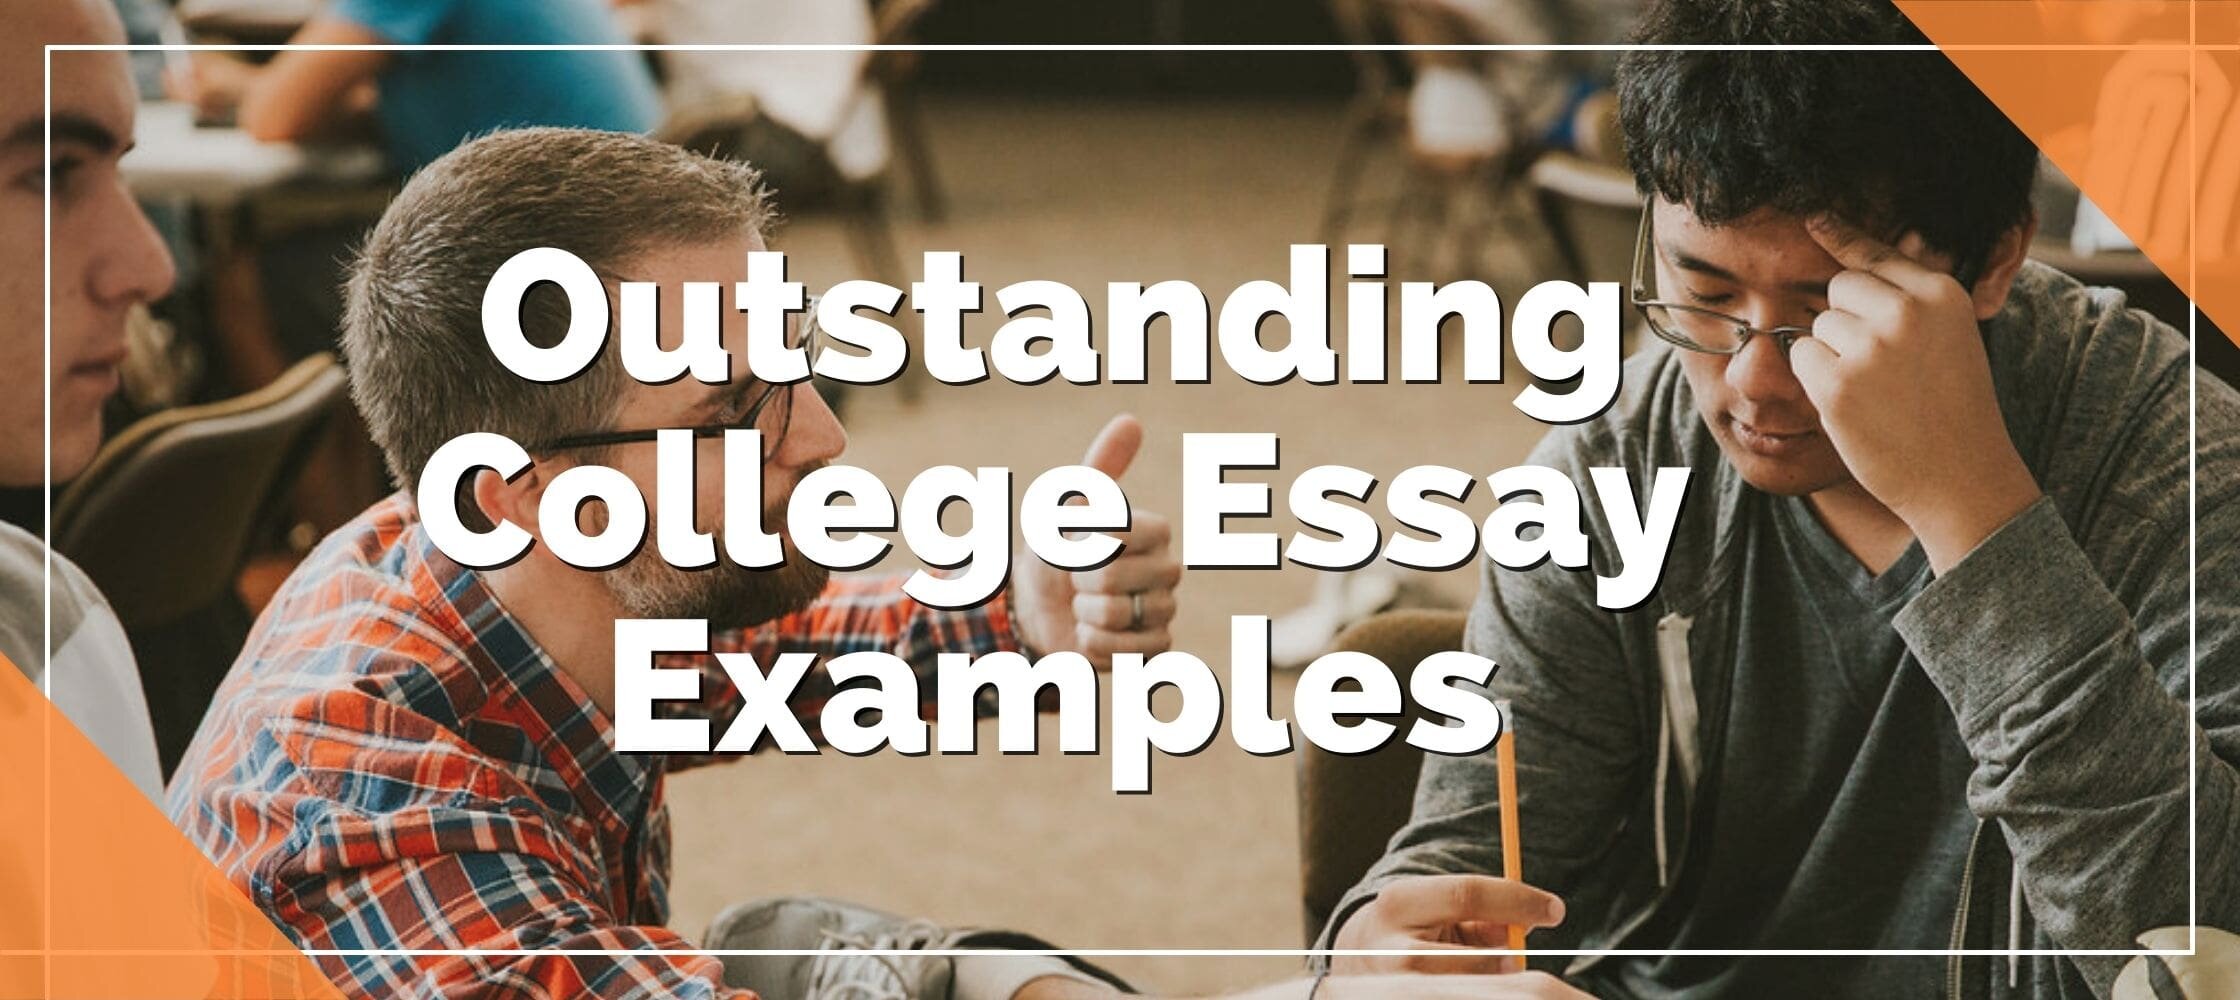 college essay review service said essay was bad